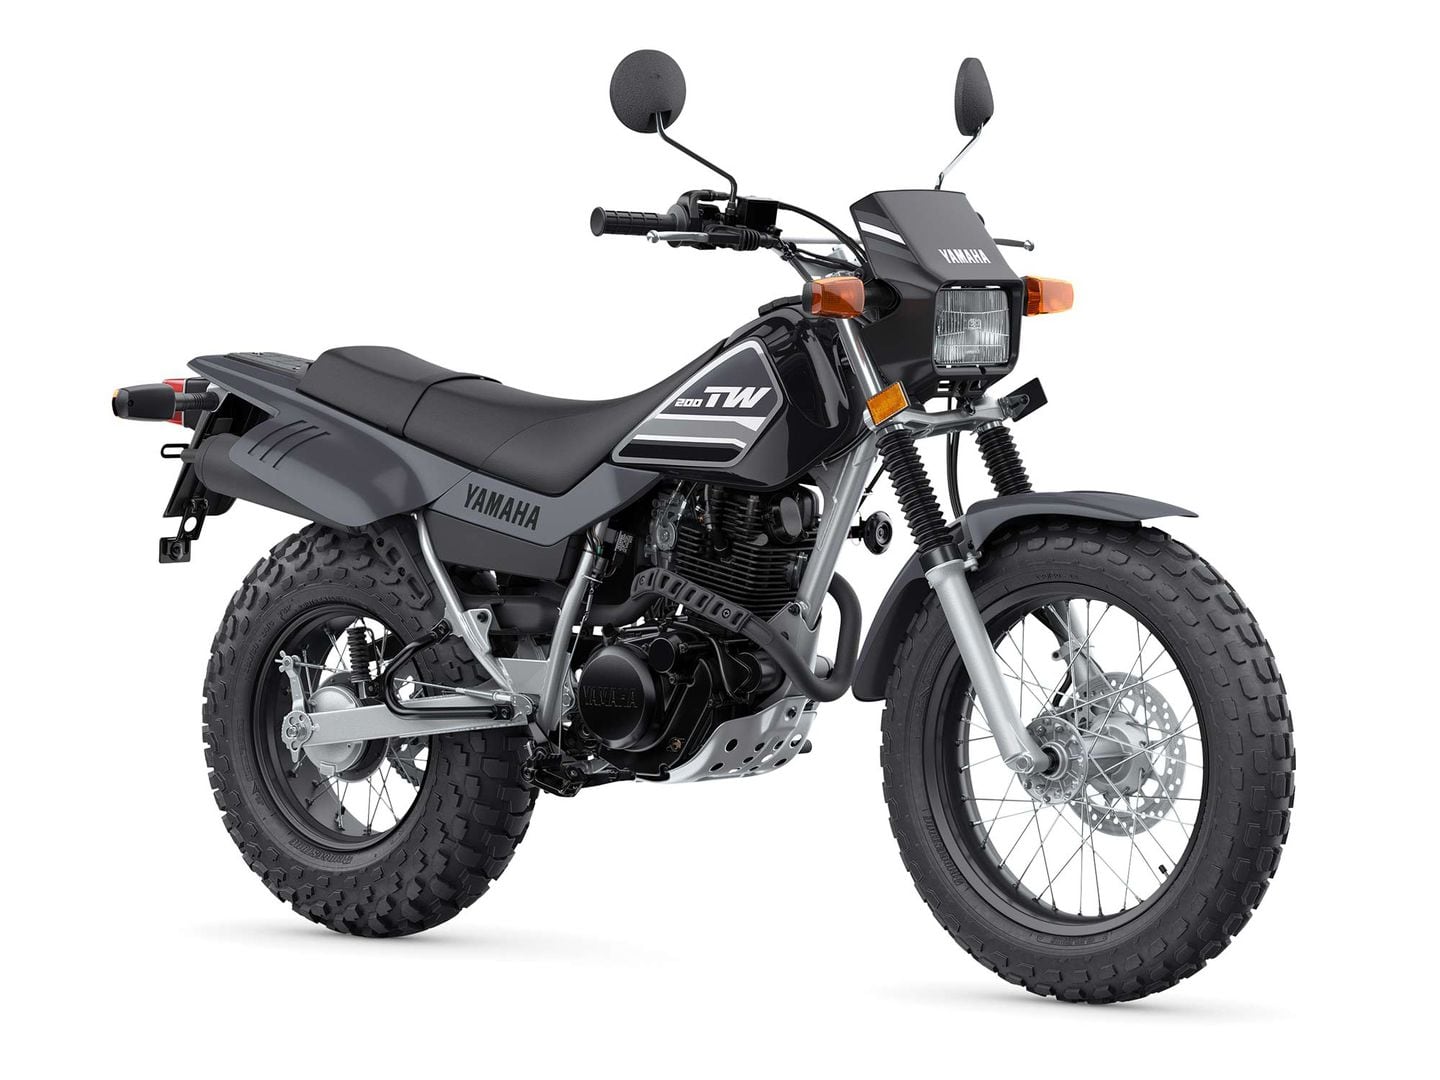 2023 Yamaha Dual Sport Motorcycles and Trailbikes First Look | Dirt Rider